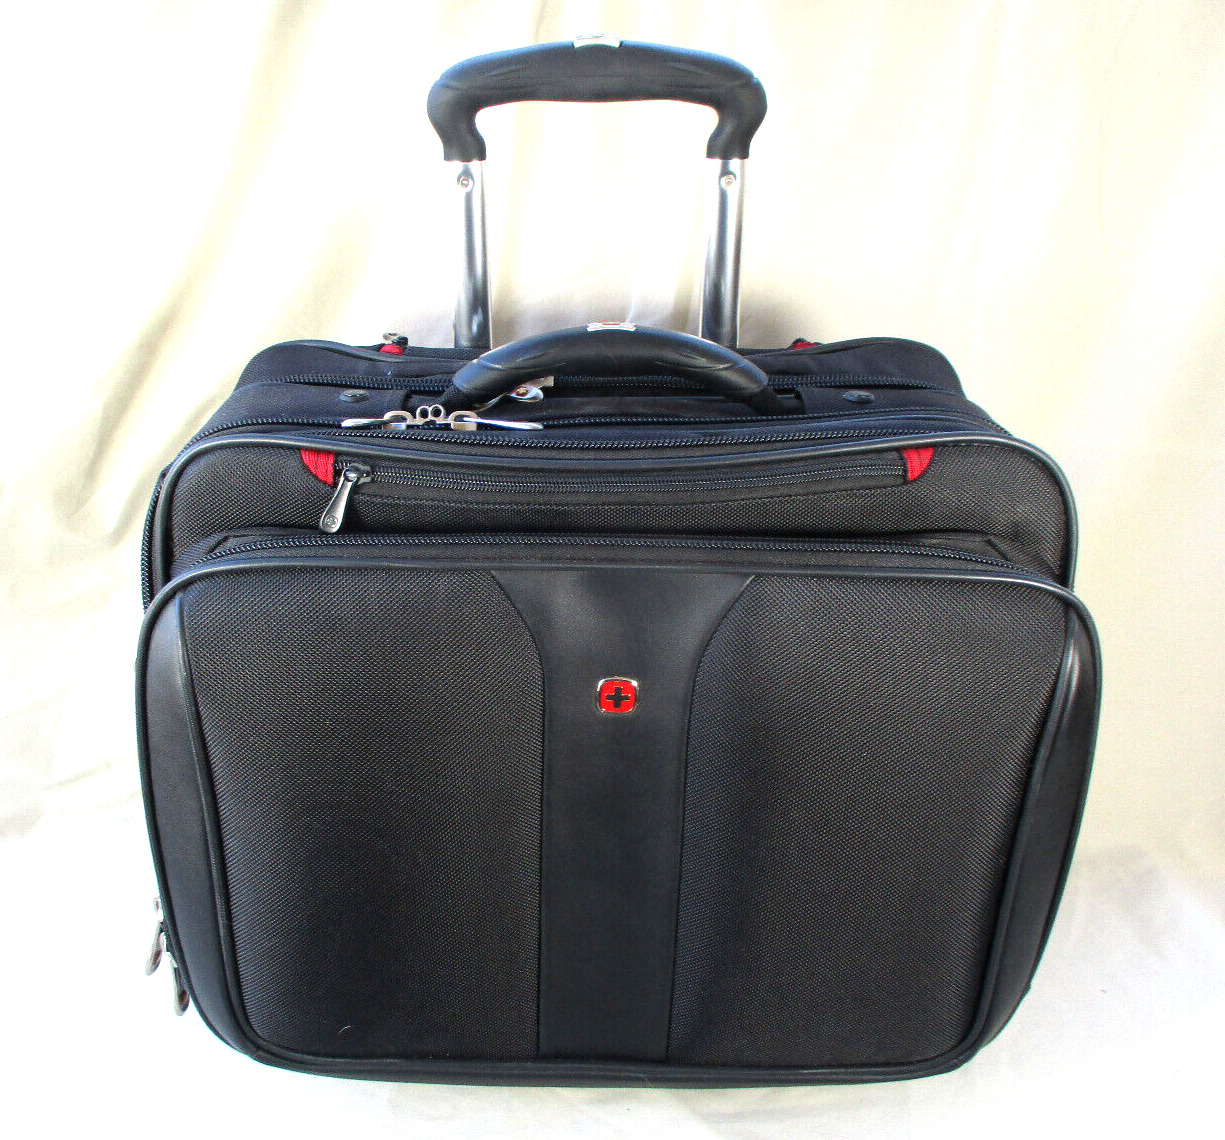 Swiss Gear Wenger Patriot Business Rolling Laptop Briefcase Luggage Carry On Bag